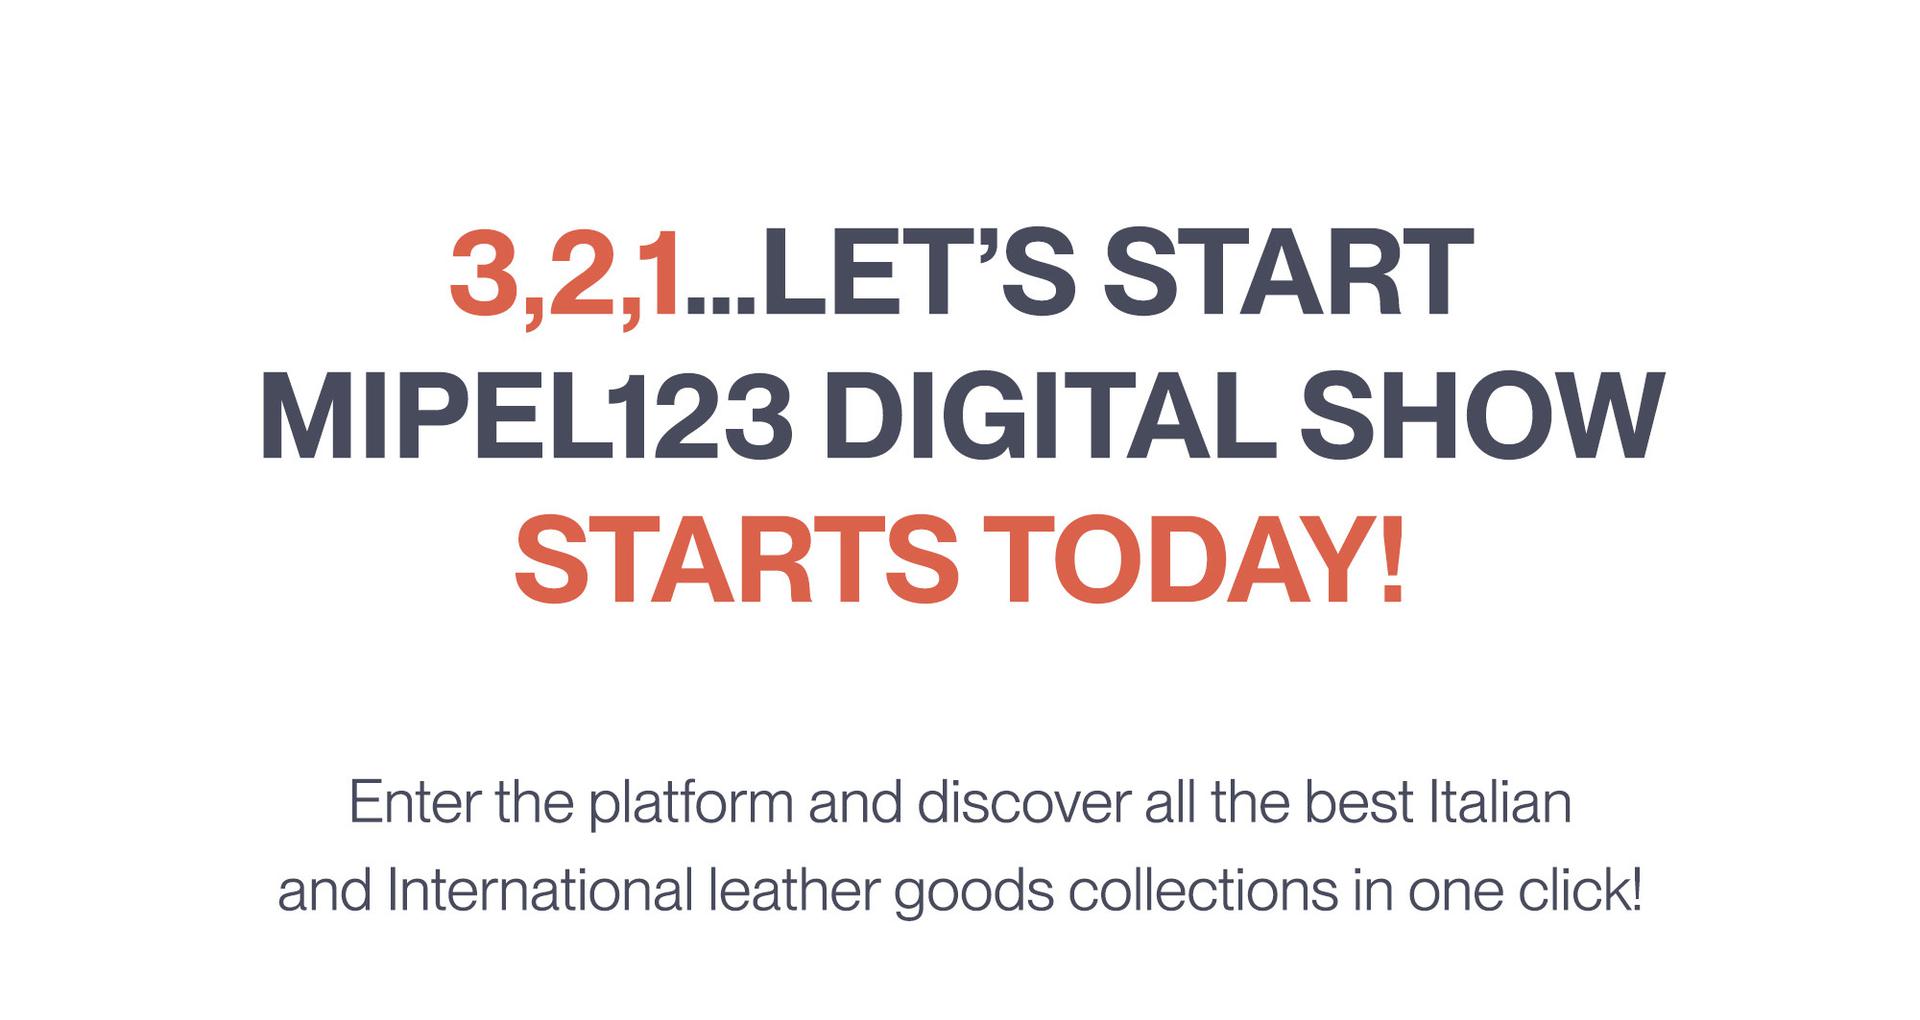 Enter the platform and discover all the best Italian and International leather goods collections in one click!